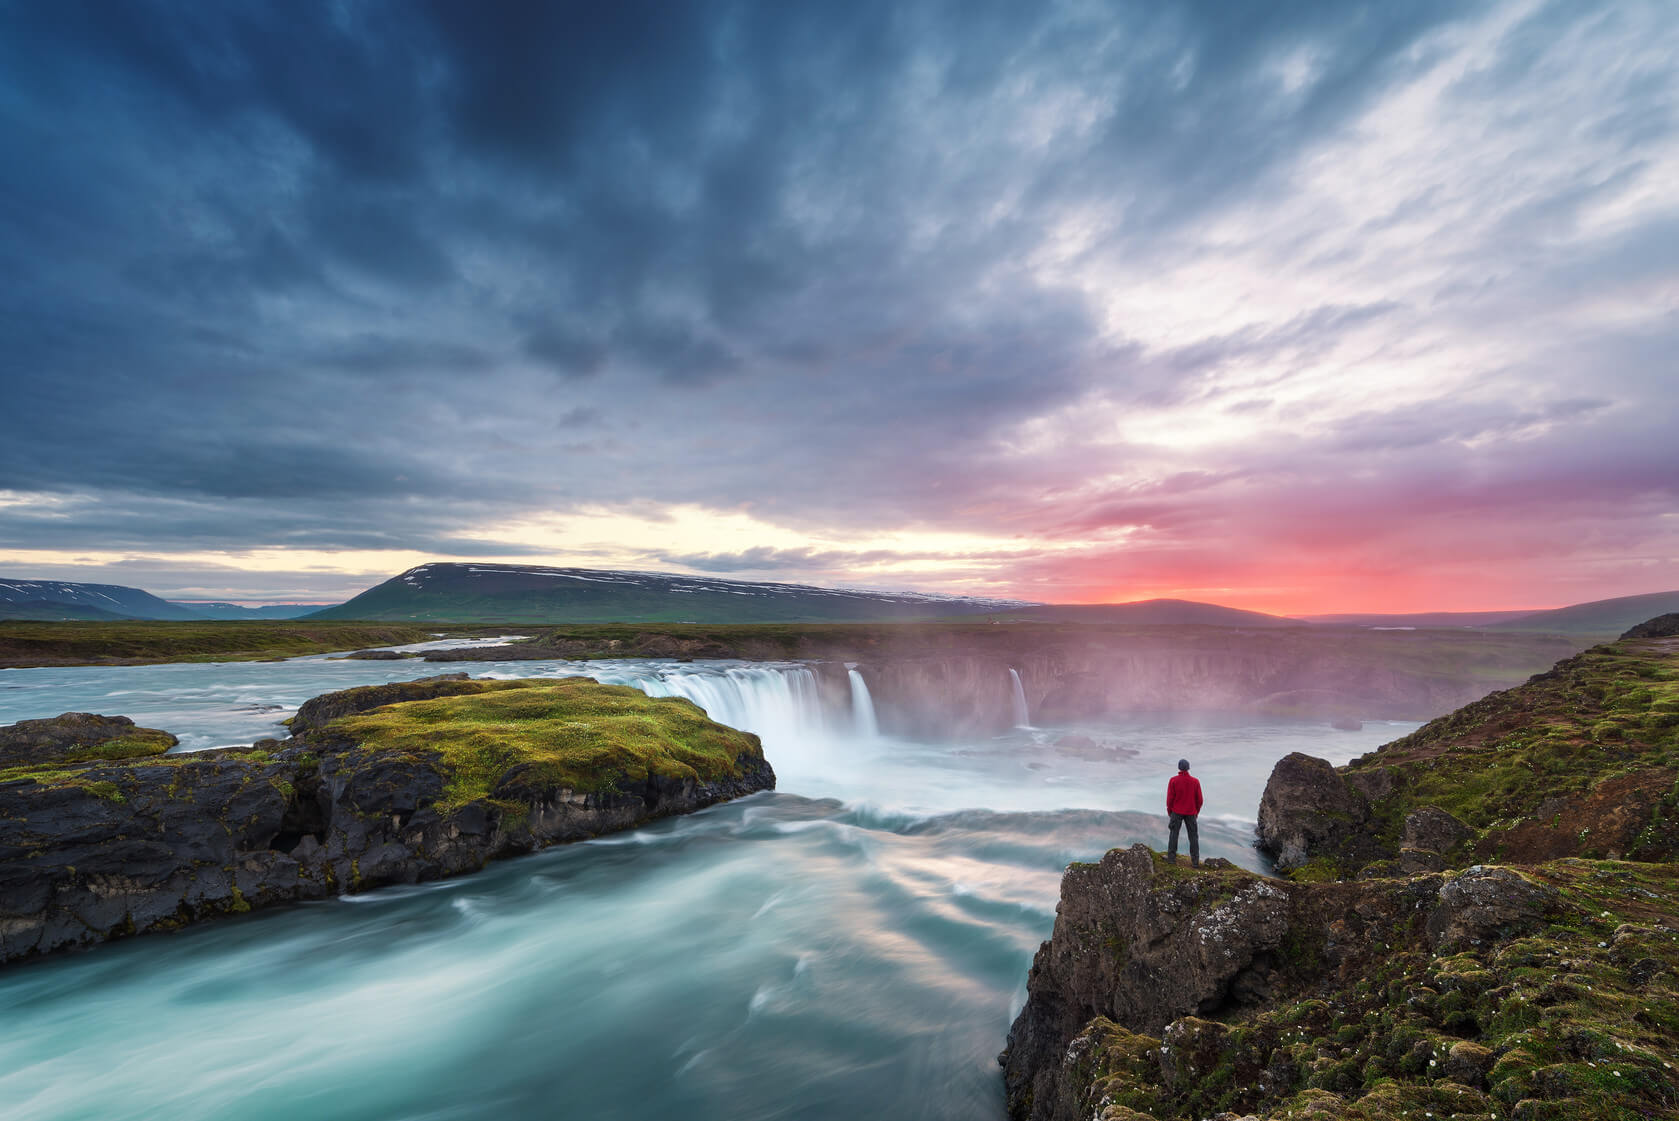 The spectacular Gullfoss waterfall is one of Iceland's main tourist attractions. It is part of the Golden Circle tourist route. The river Hvita plunges down into a canyon in two steps.